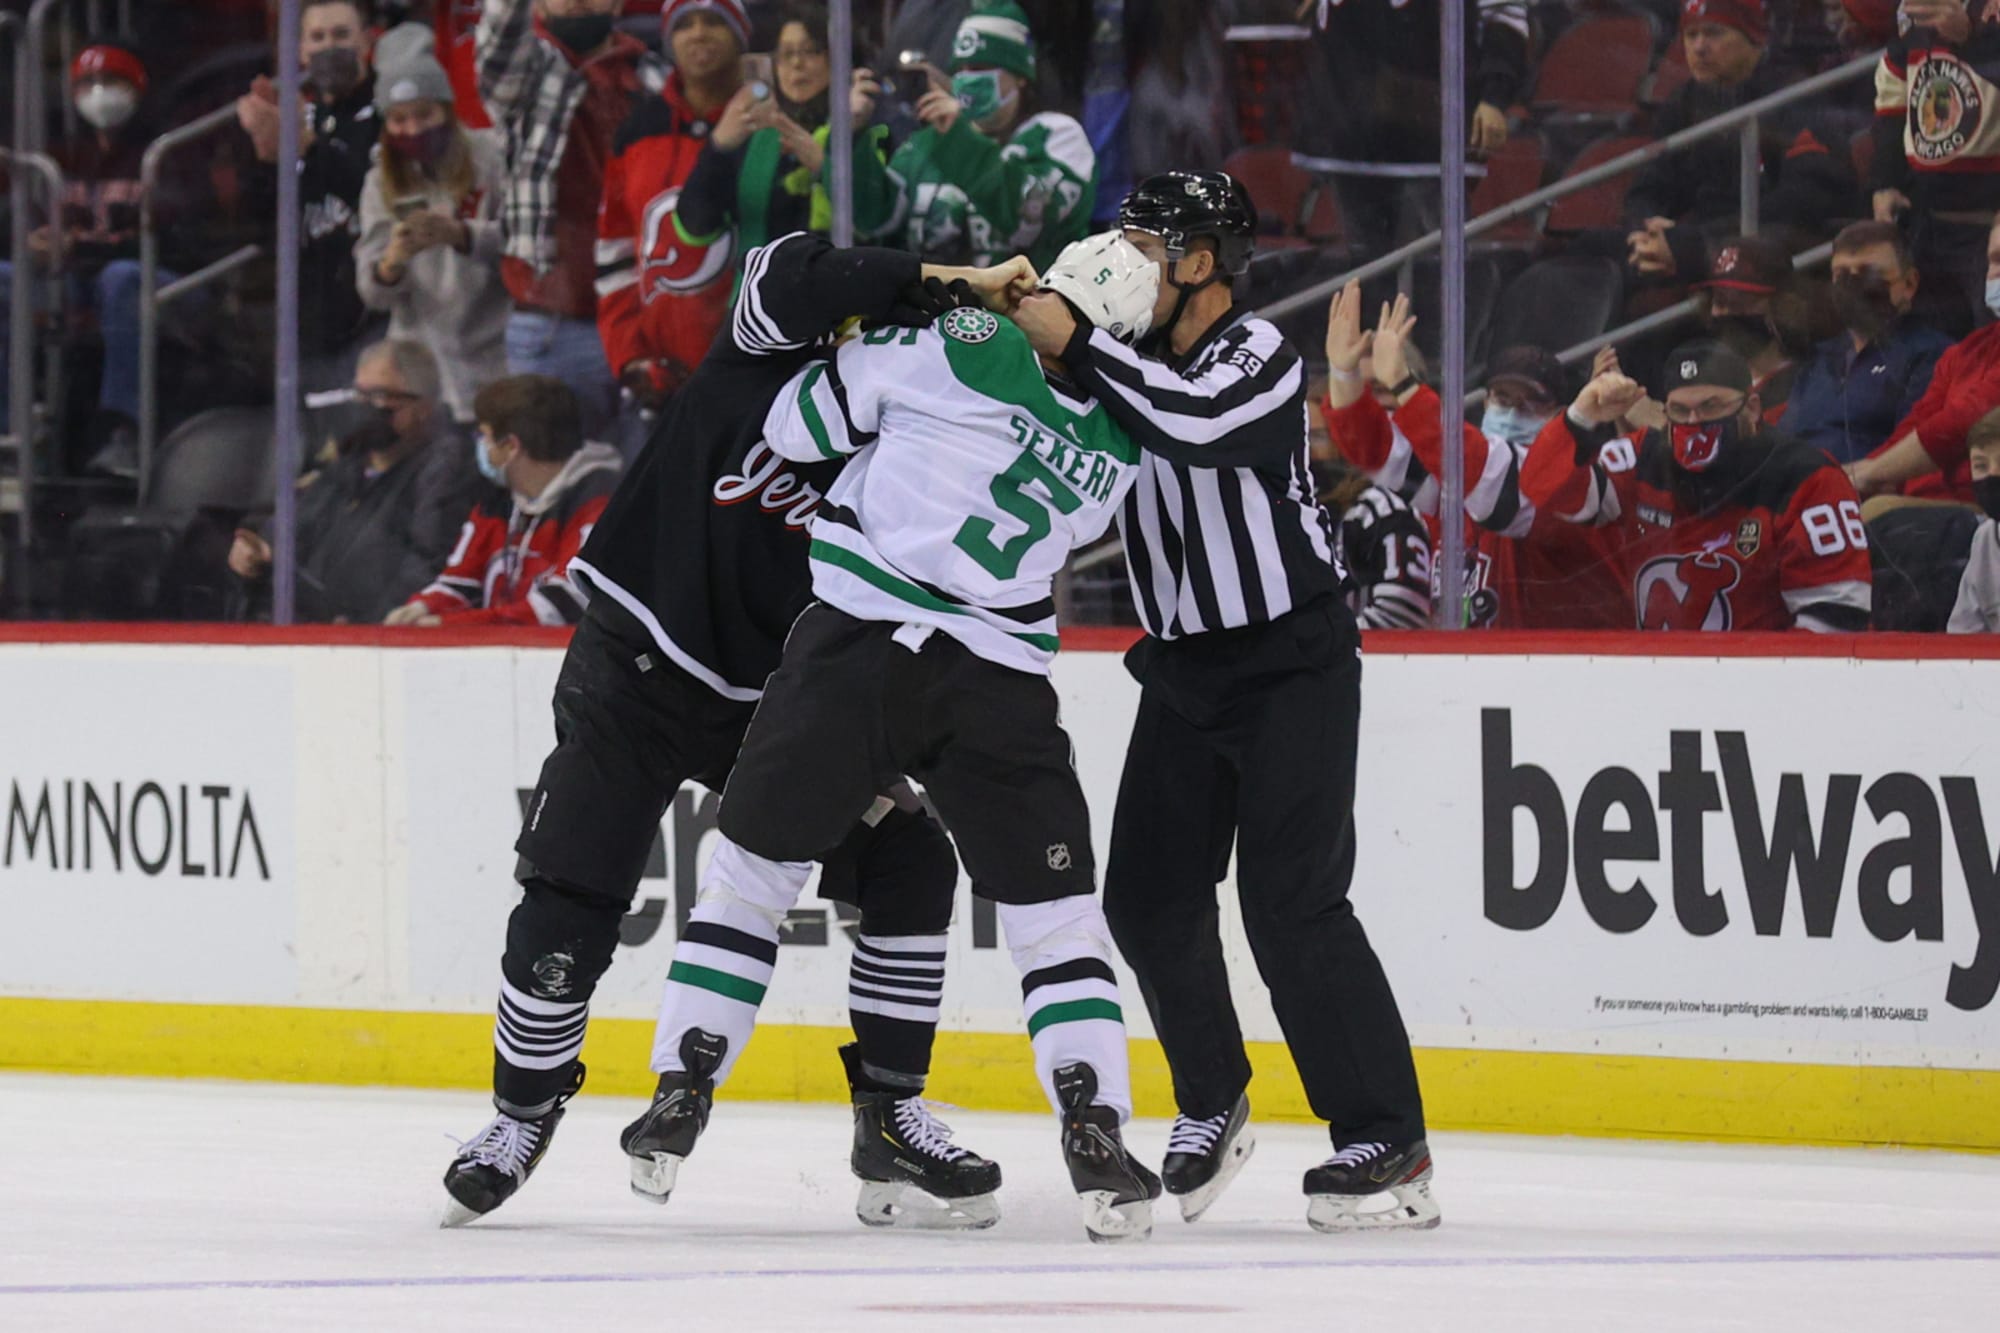 Dallas Stars enter the Devil's Den as they take on the New Jersey